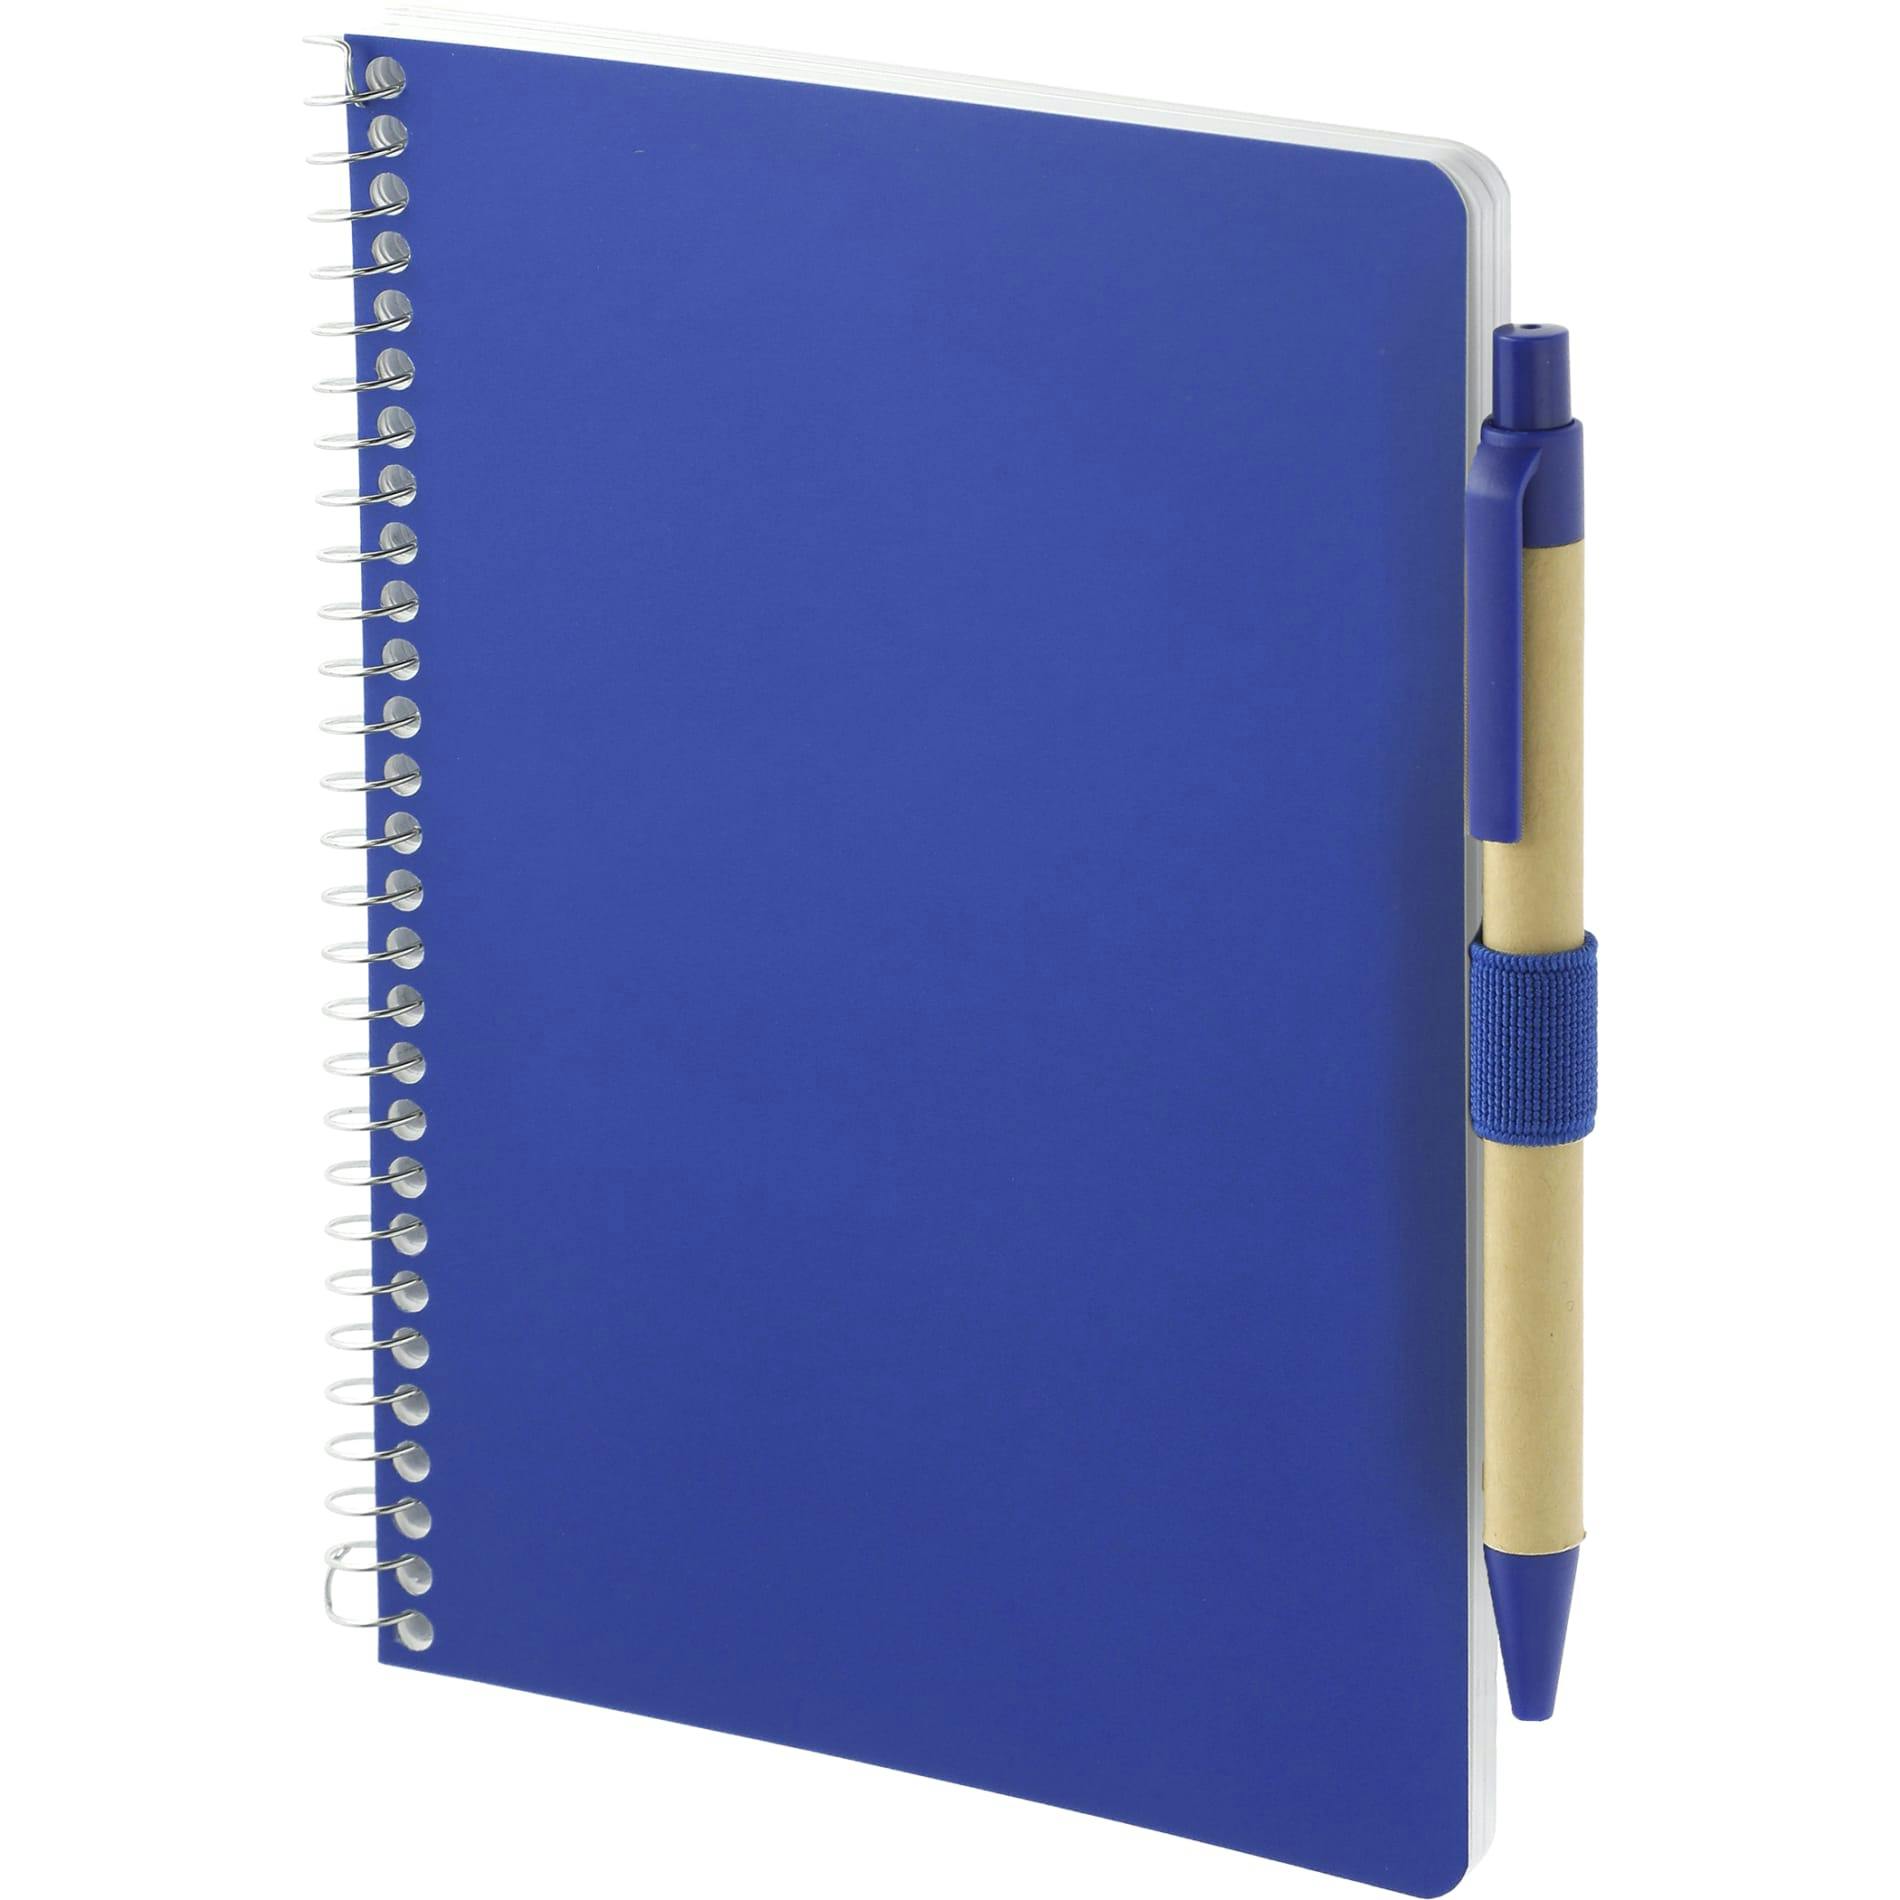 5” x 7” FSC® Mix Spiral Notebook with Pen - additional Image 4